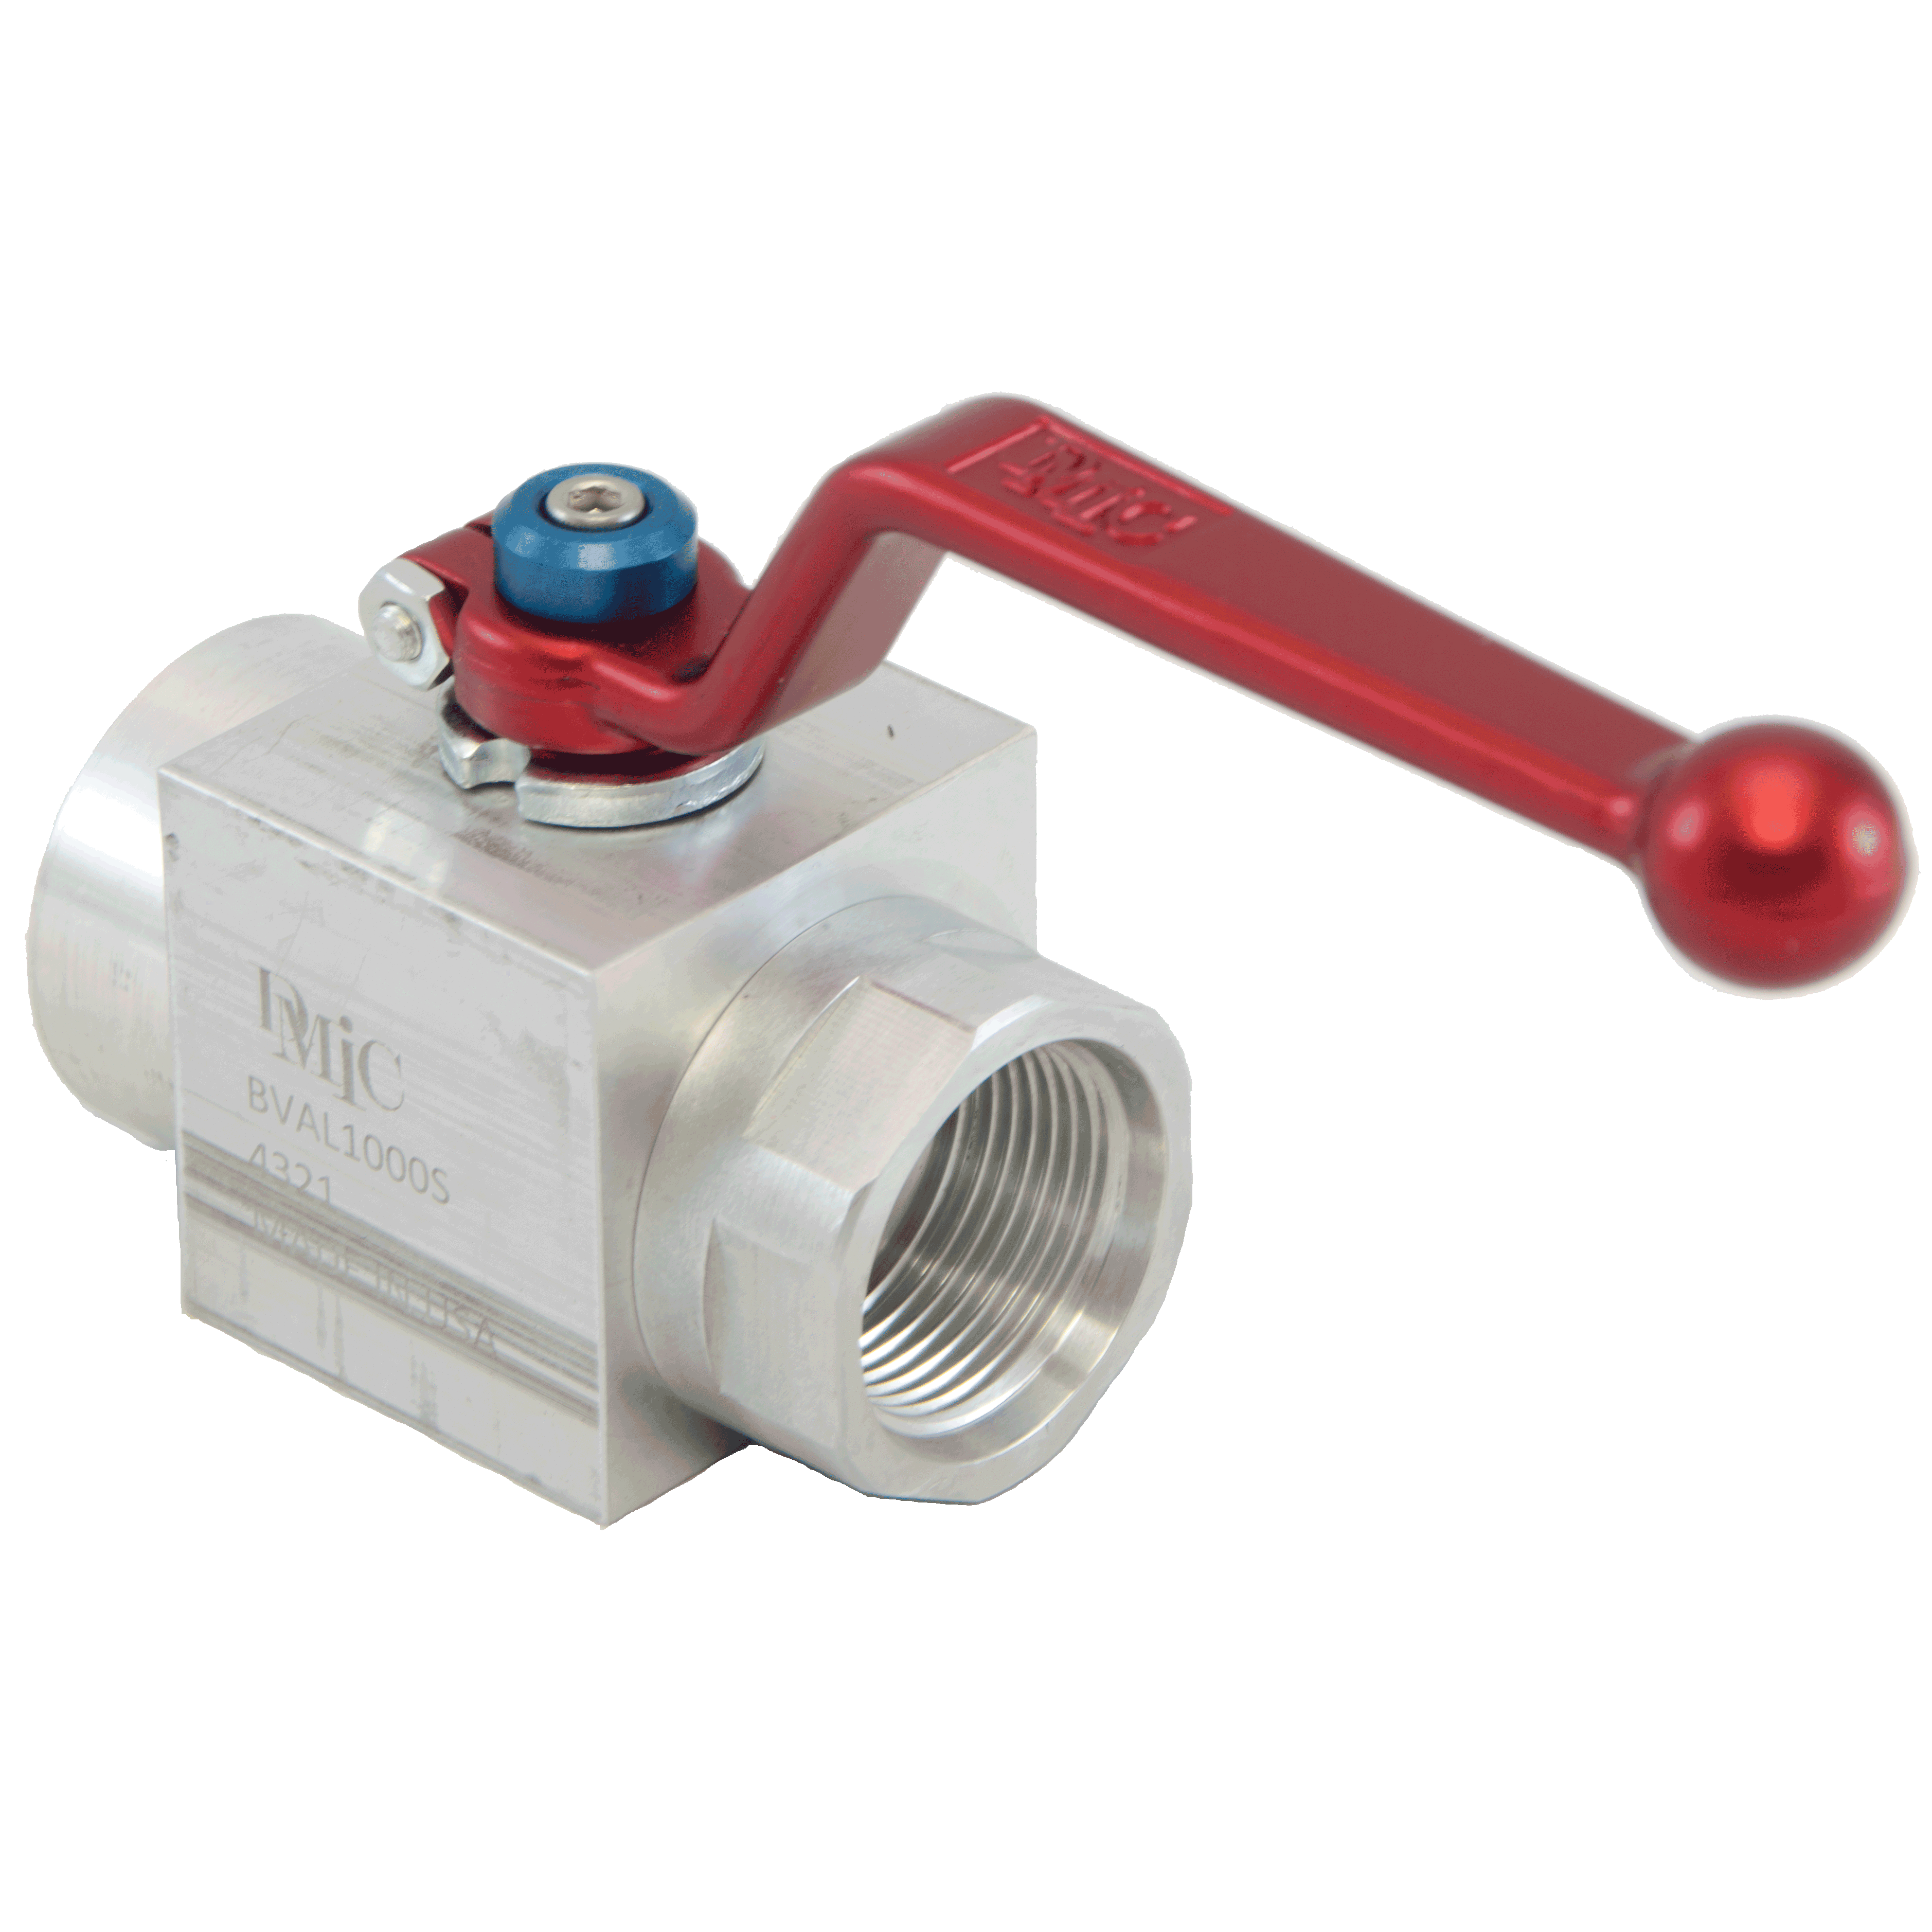 BVAL-1250S-4321 : DMIC Suction Ball Valve, #20 SAE (3/8), Aluminum, 600psi, Two-Way